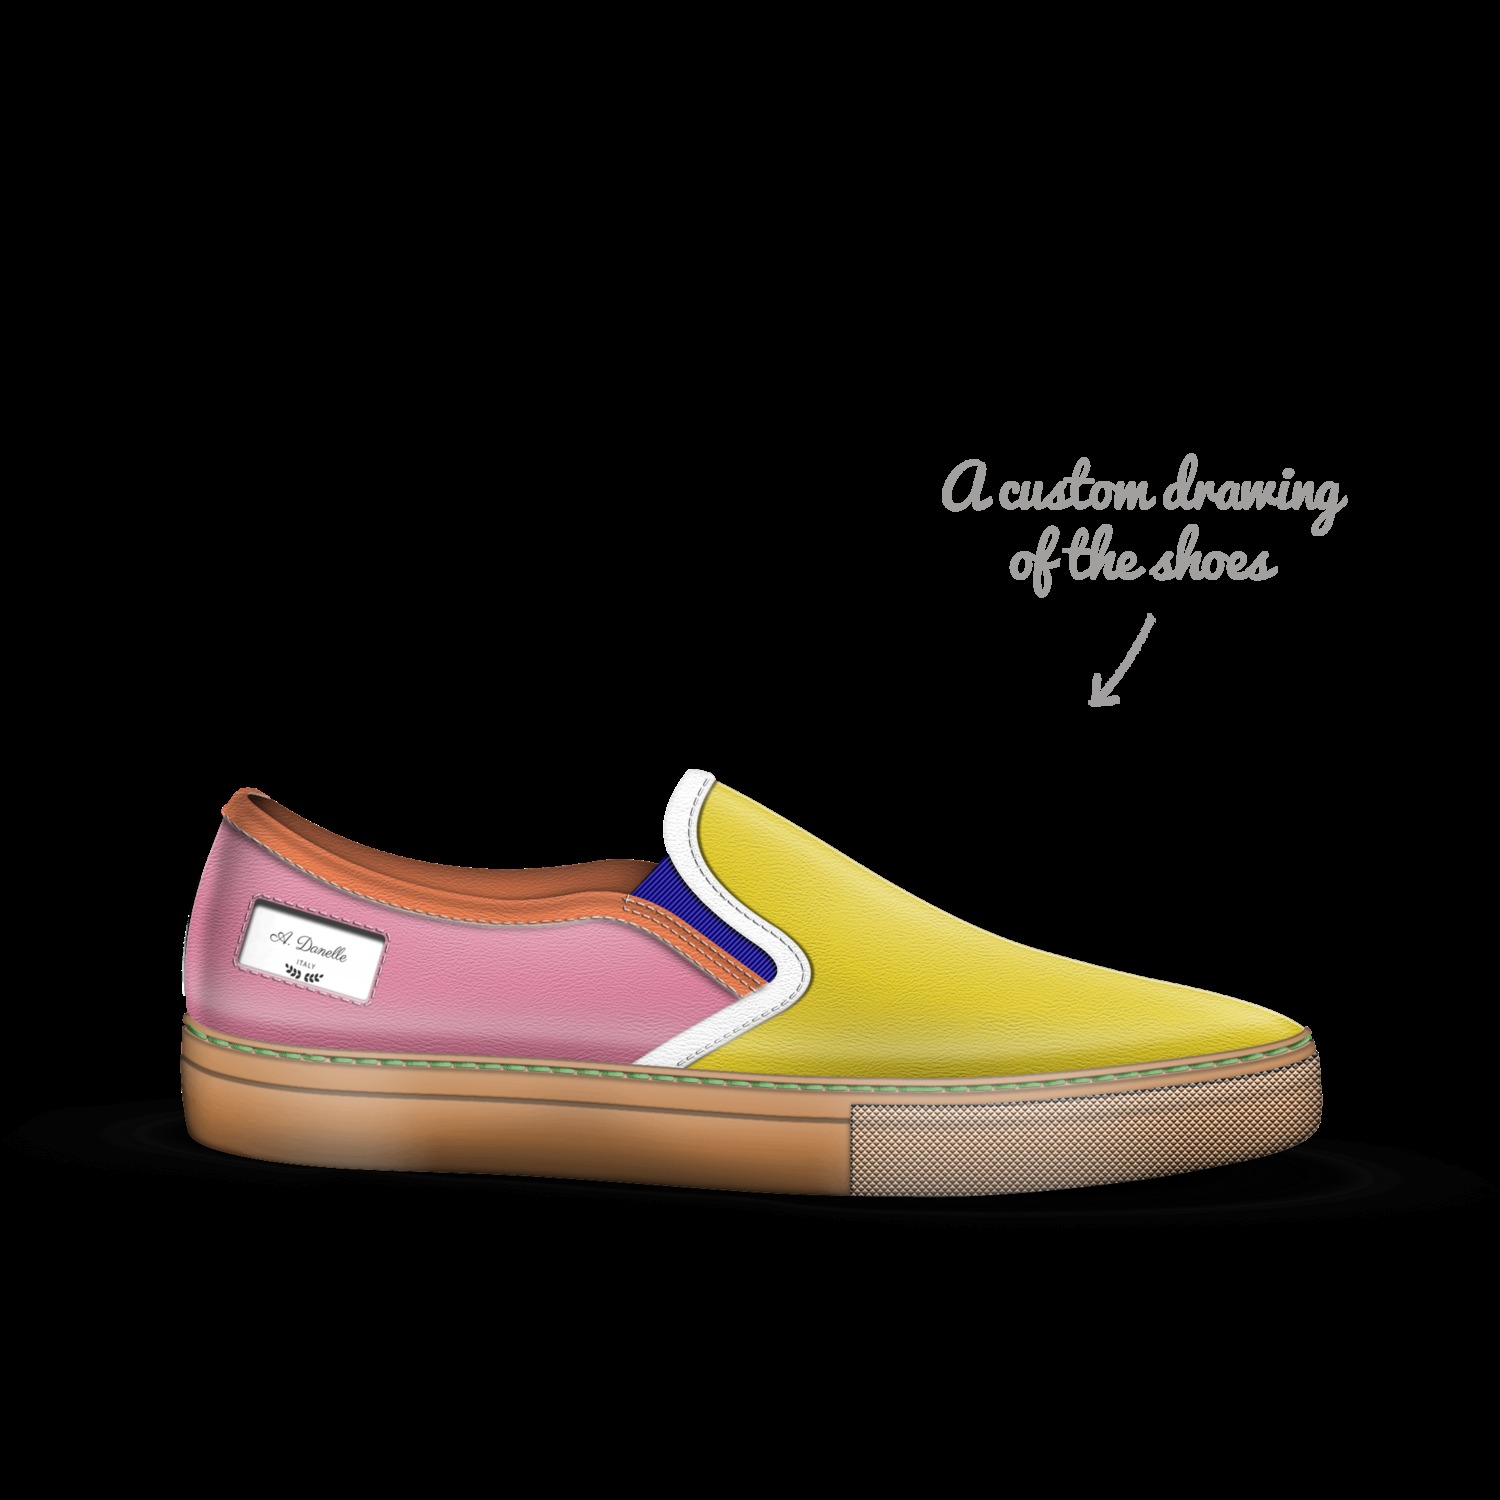 A Custom Shoe concept by Amber Porter